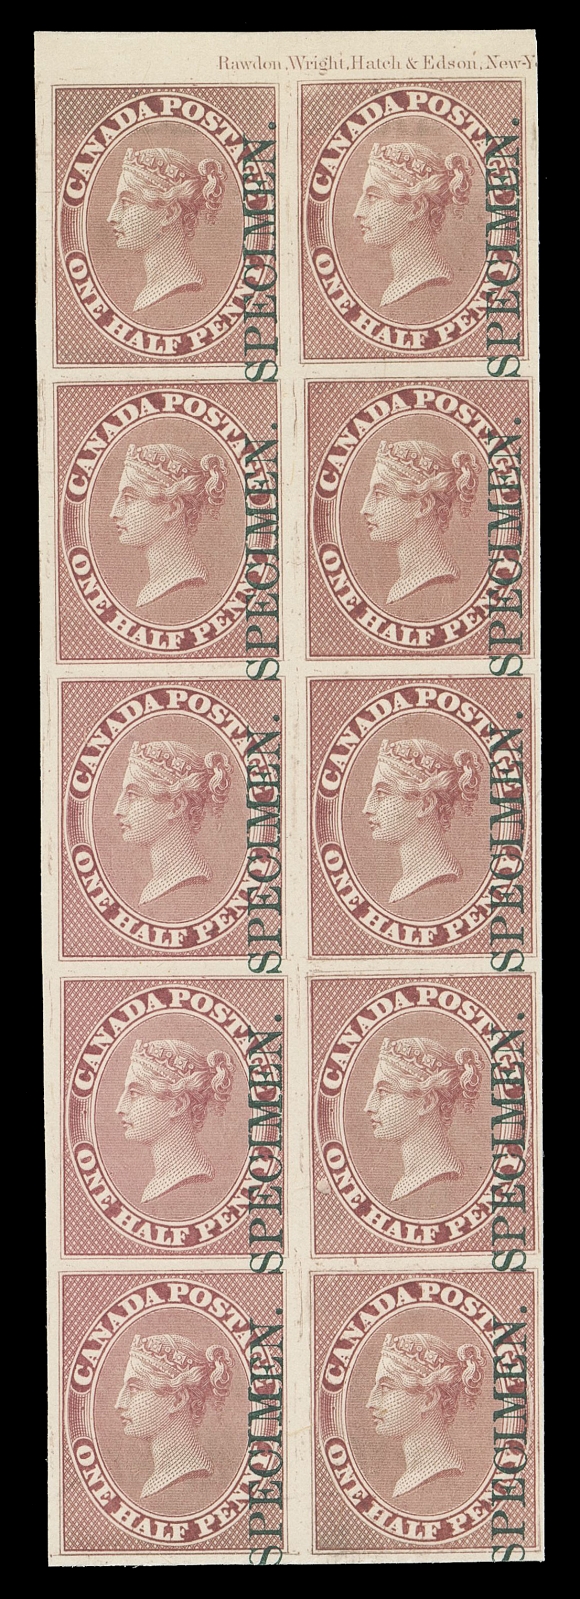 CANADA -  2 PENCE  8Pi + varieties,Top margin plate imprint proof block of ten on card mounted india paper (Positions 9-10 / 57-58) with vertical SPECIMEN overprint in dark green, displays prominently three different documented Strong Re-entries at Positions 22, 46, 58 (from plate of 120 subjects) located on the second, fourth and fifth stamps in right column, VF (Unitrade cat. as normal proofs)